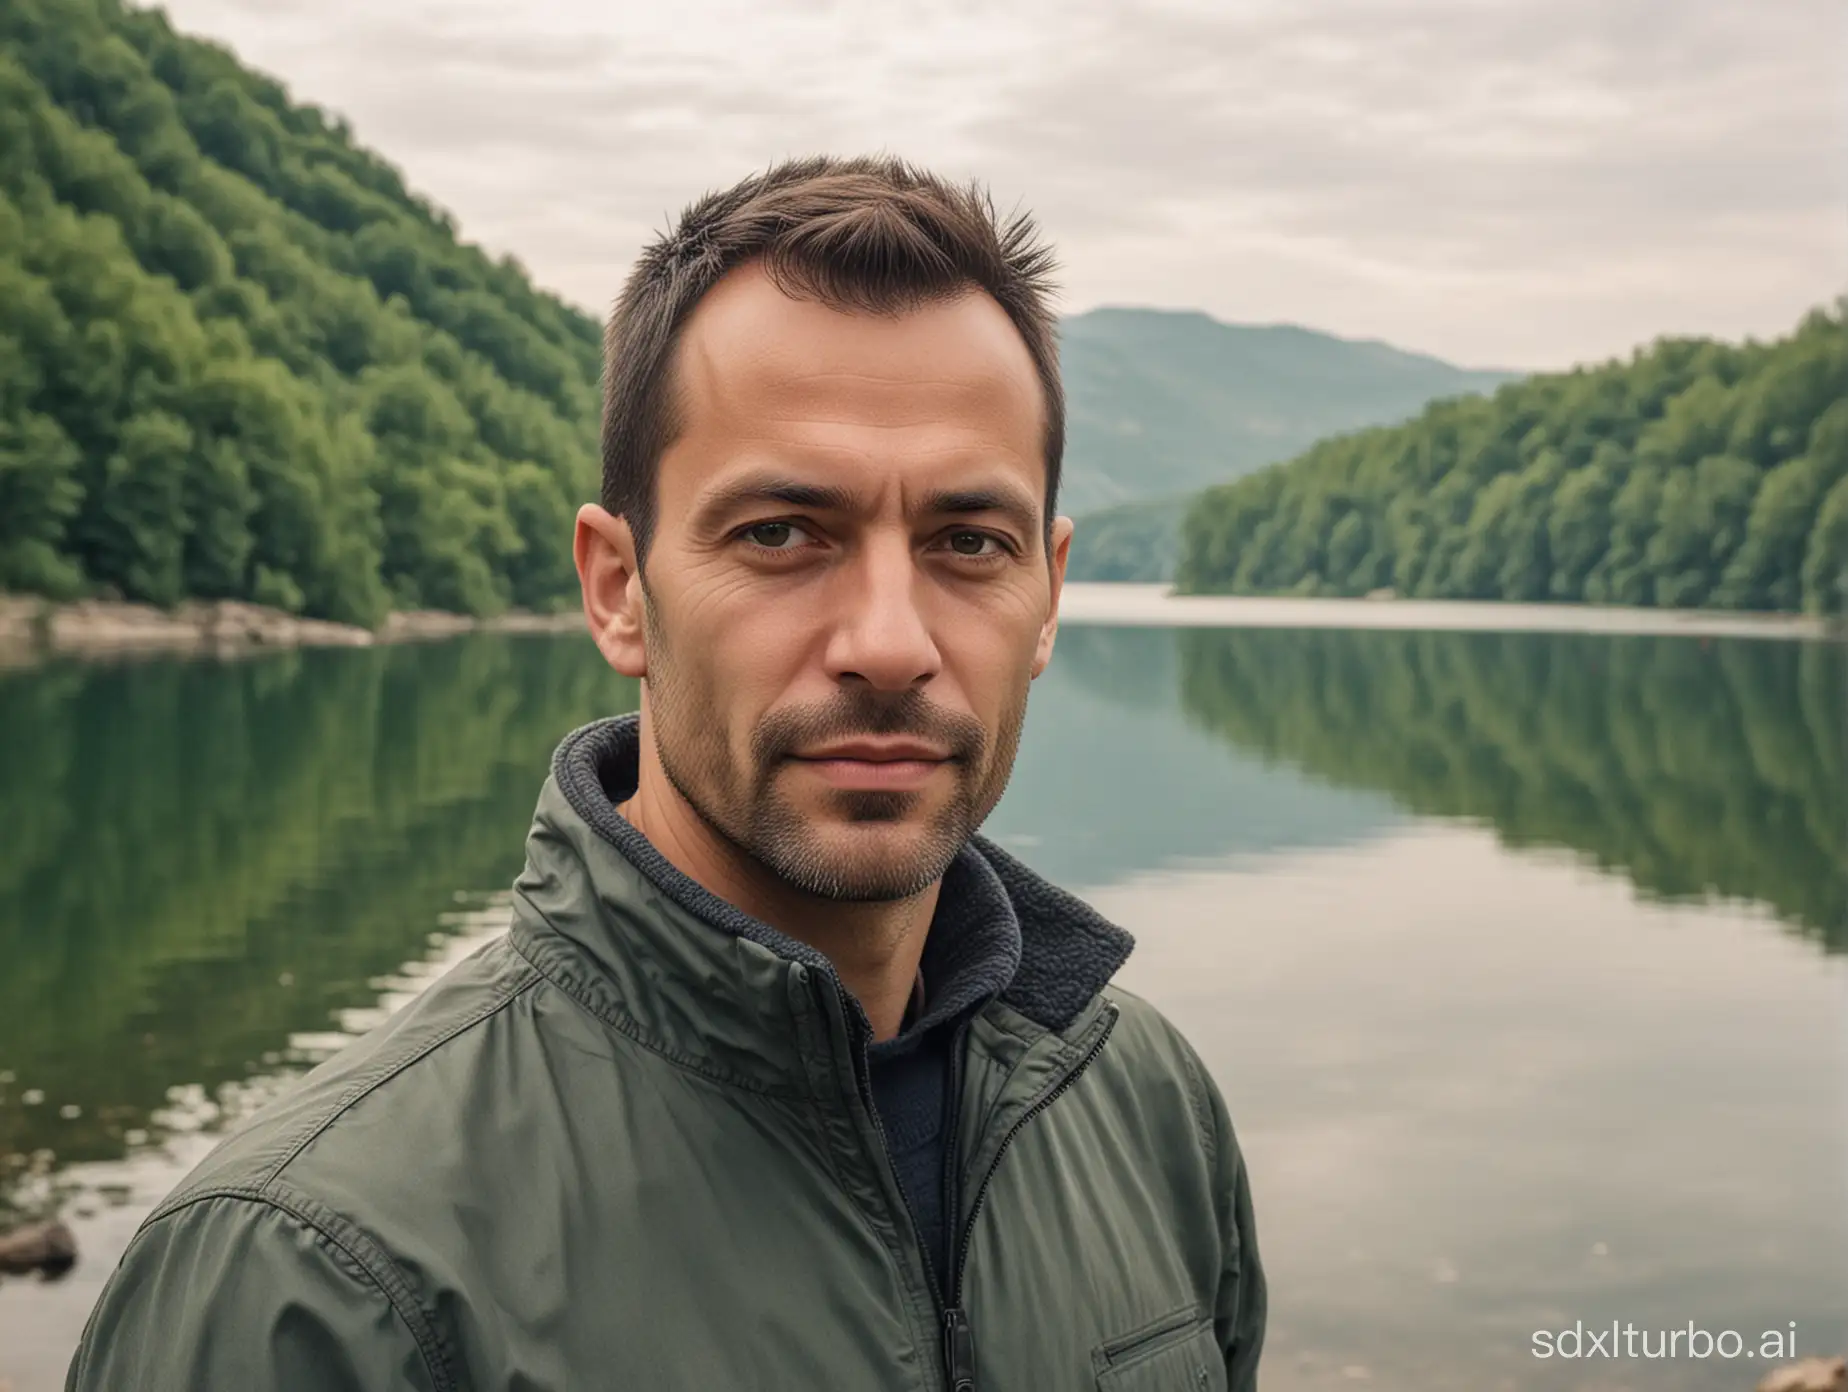 Portrait-of-an-Eastern-European-Man-in-His-Thirties-by-a-Serene-Lake